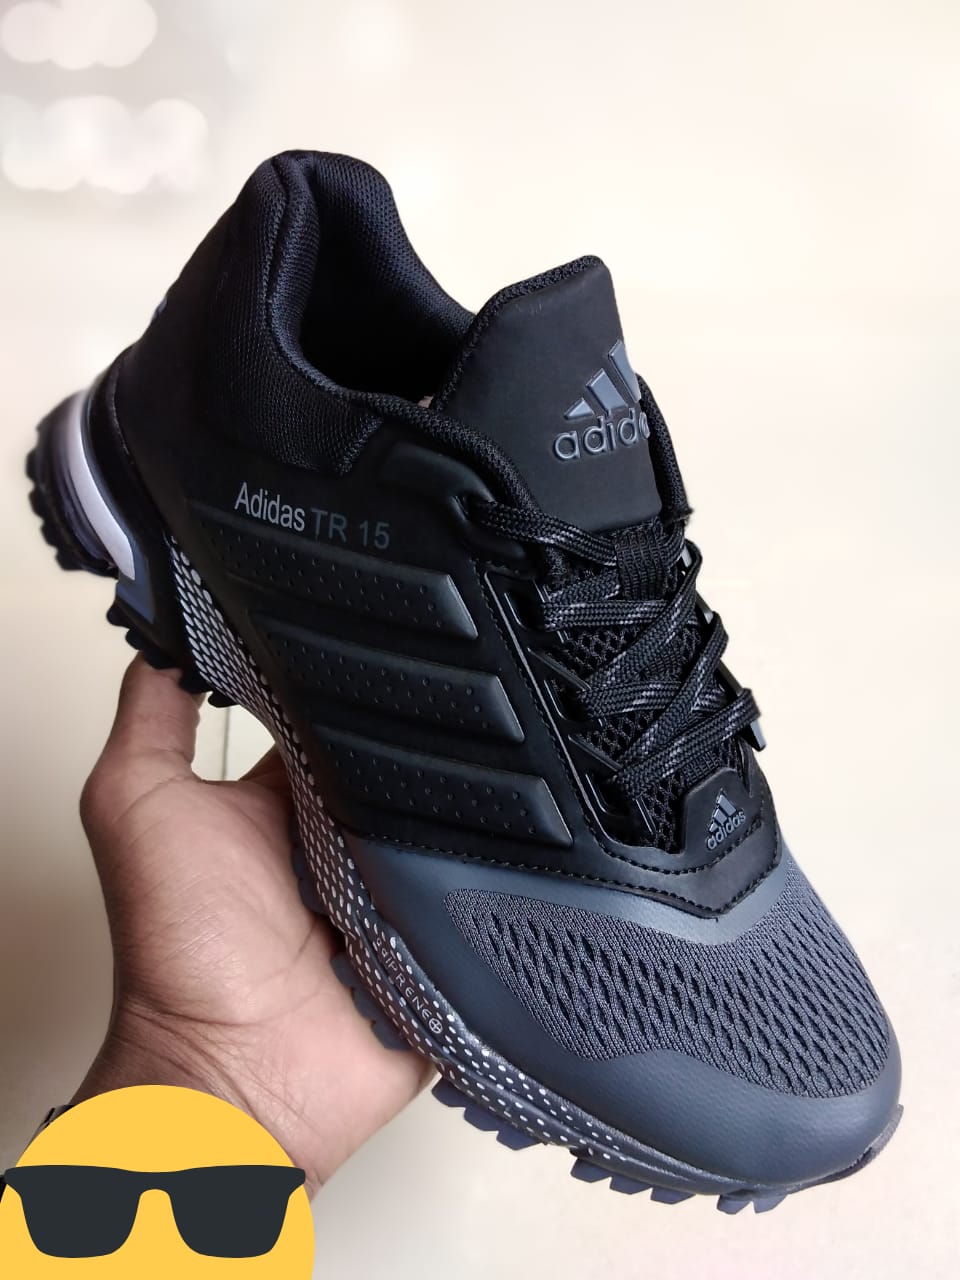 creciendo Escultura puñetazo Mwacheezy Collection on Twitter: "Heads up: Adidas Tx-15 kicks dropped  yesterday, retailing at Ksh.3000 #IkoKiatuKe https://t.co/wNriFR3AsB" /  Twitter